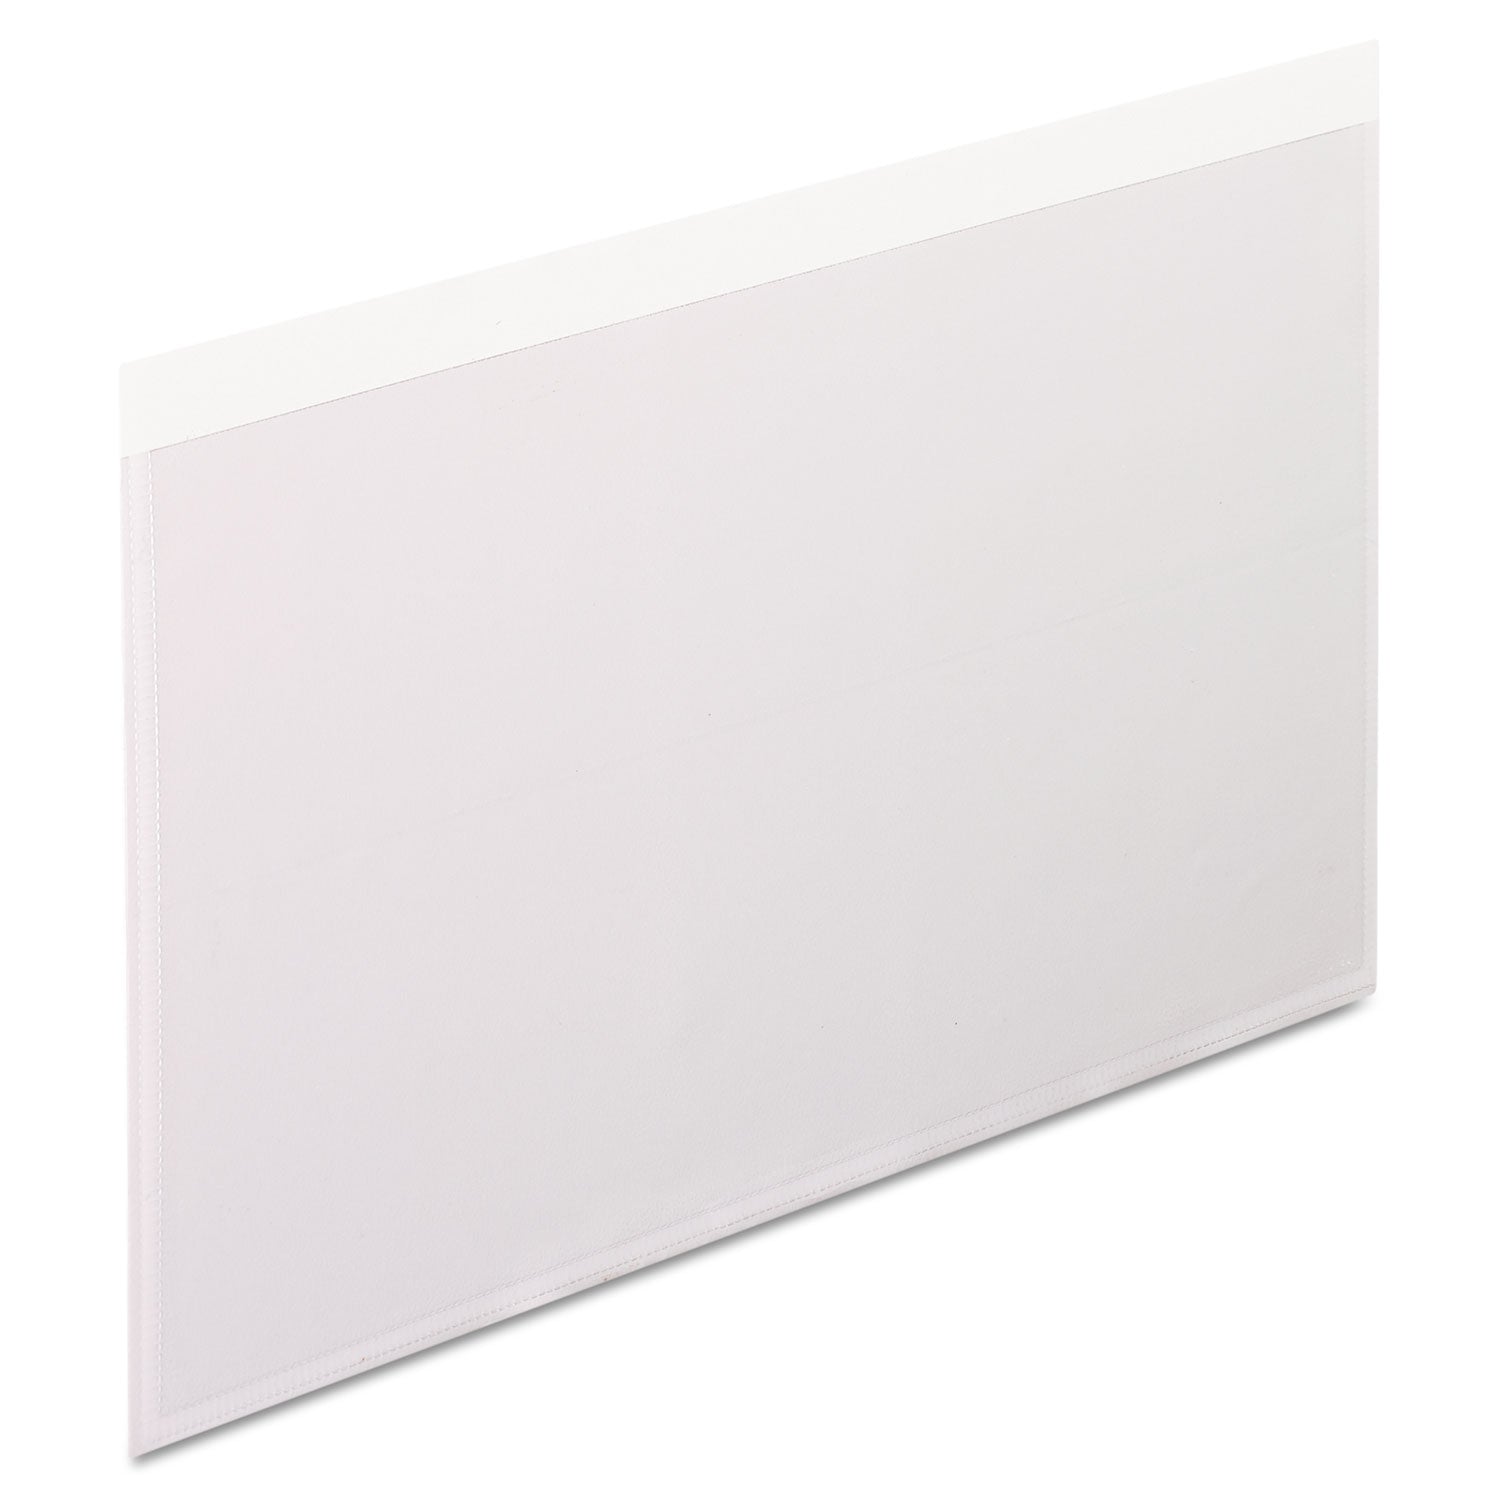 self-adhesive-pockets-5-x-8-clear-front-white-backing-100-box_pfx99377 - 1